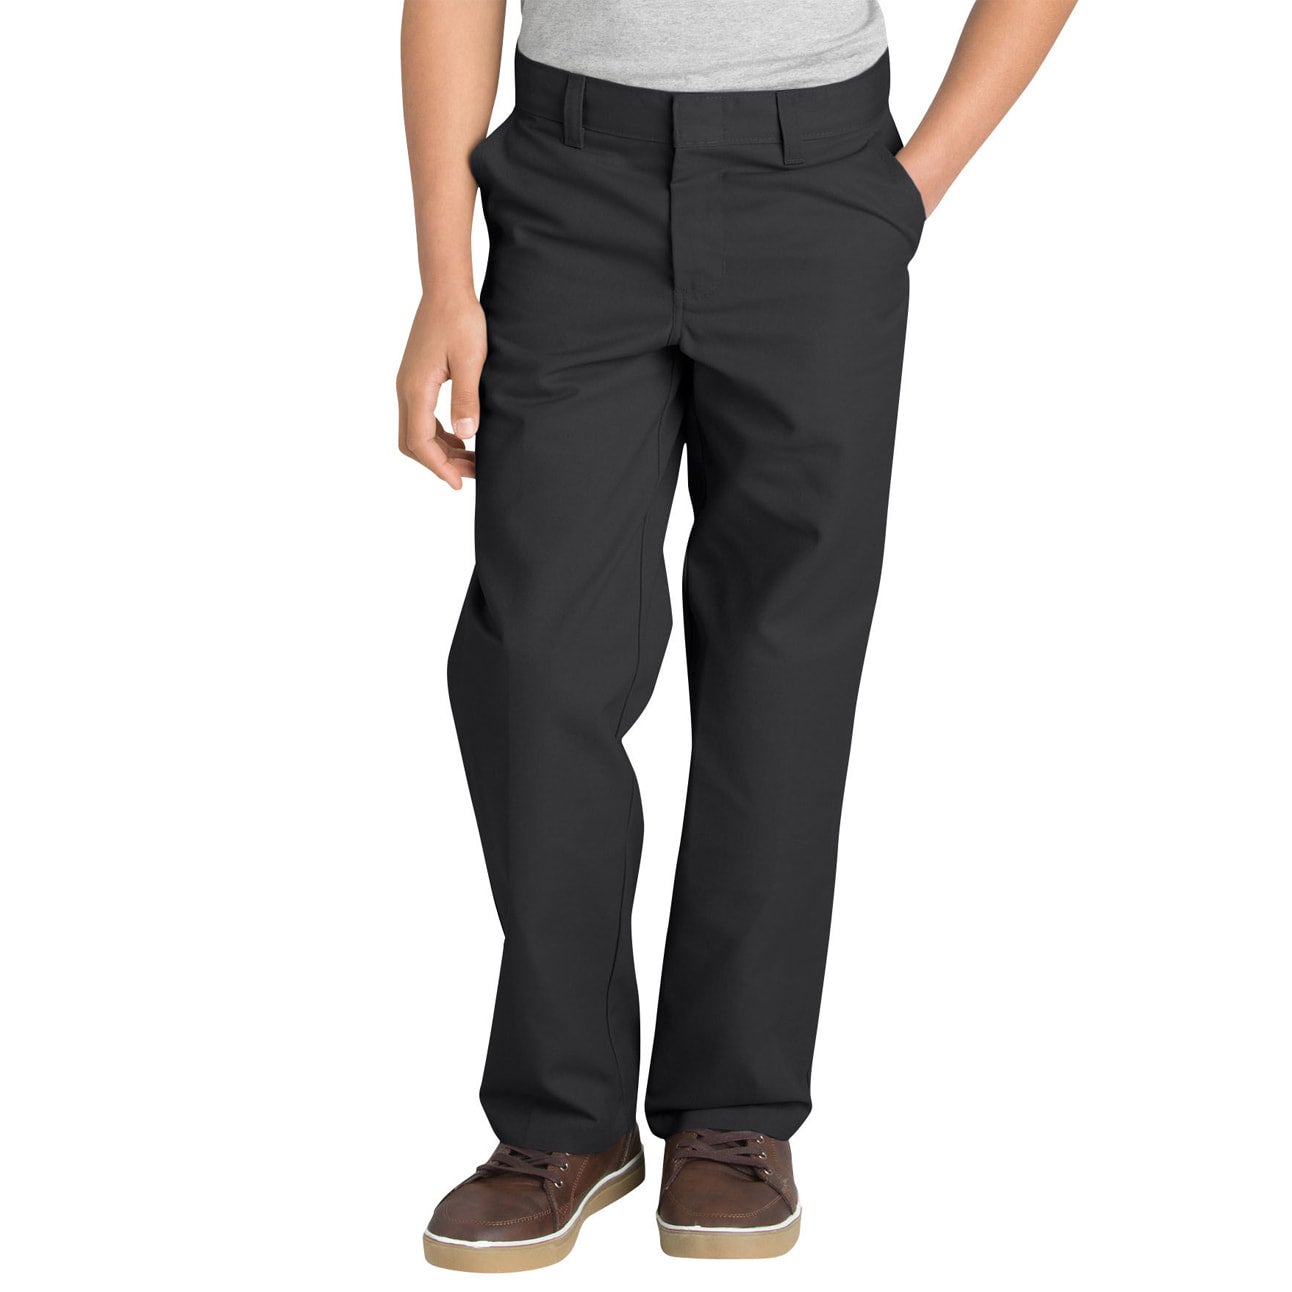 Boys School Trouser Pants - Get Best Price from Manufacturers & Suppliers  in India